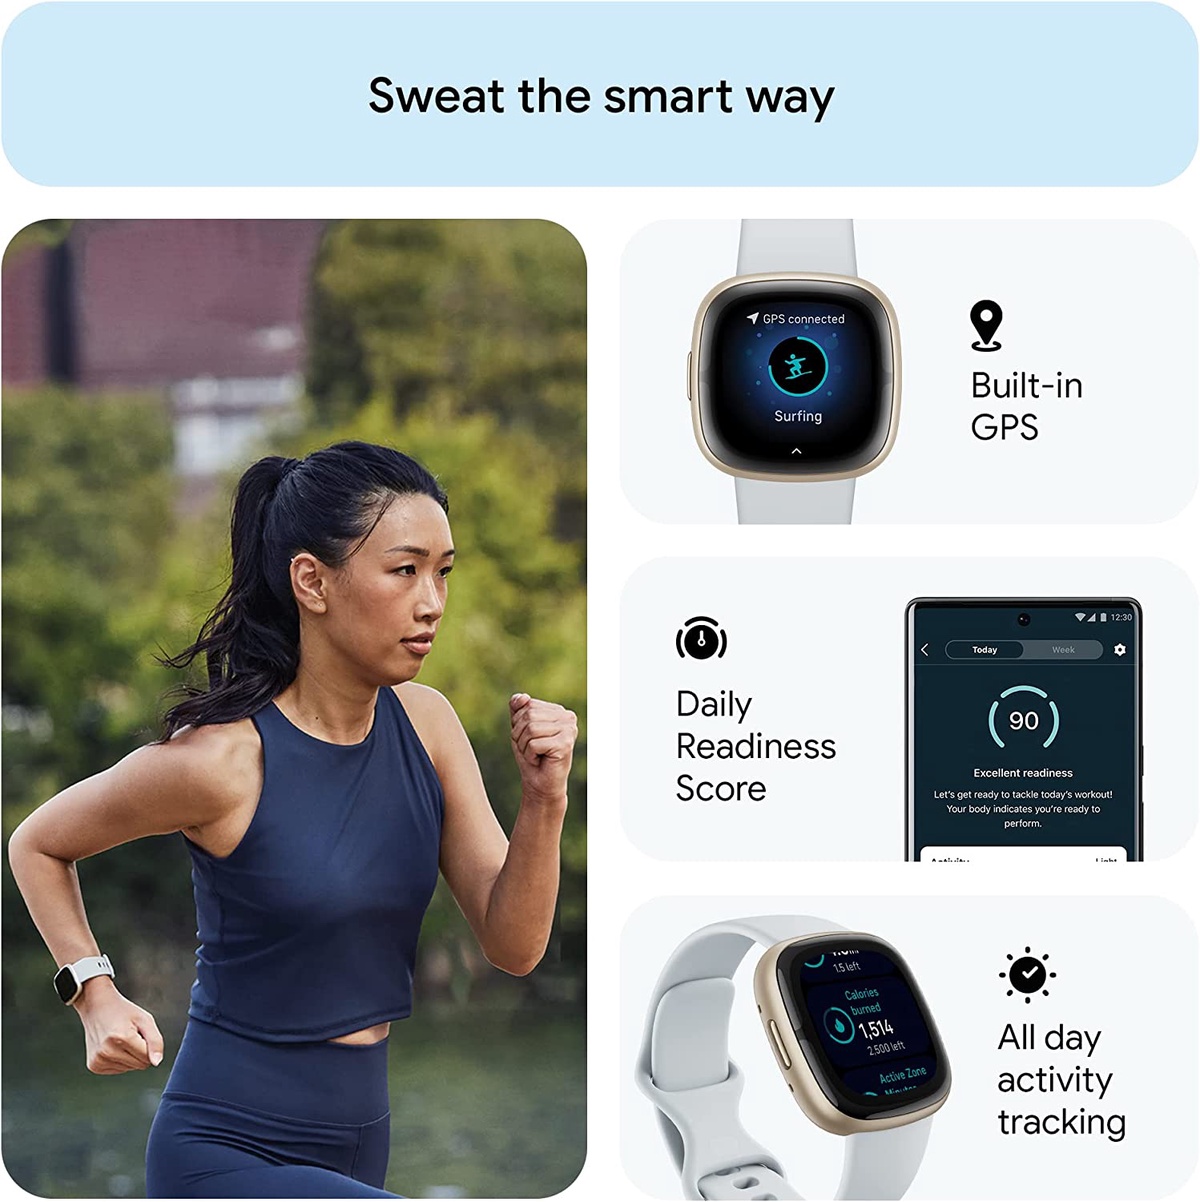 Are you interested in buying Fitness Smartwatch?